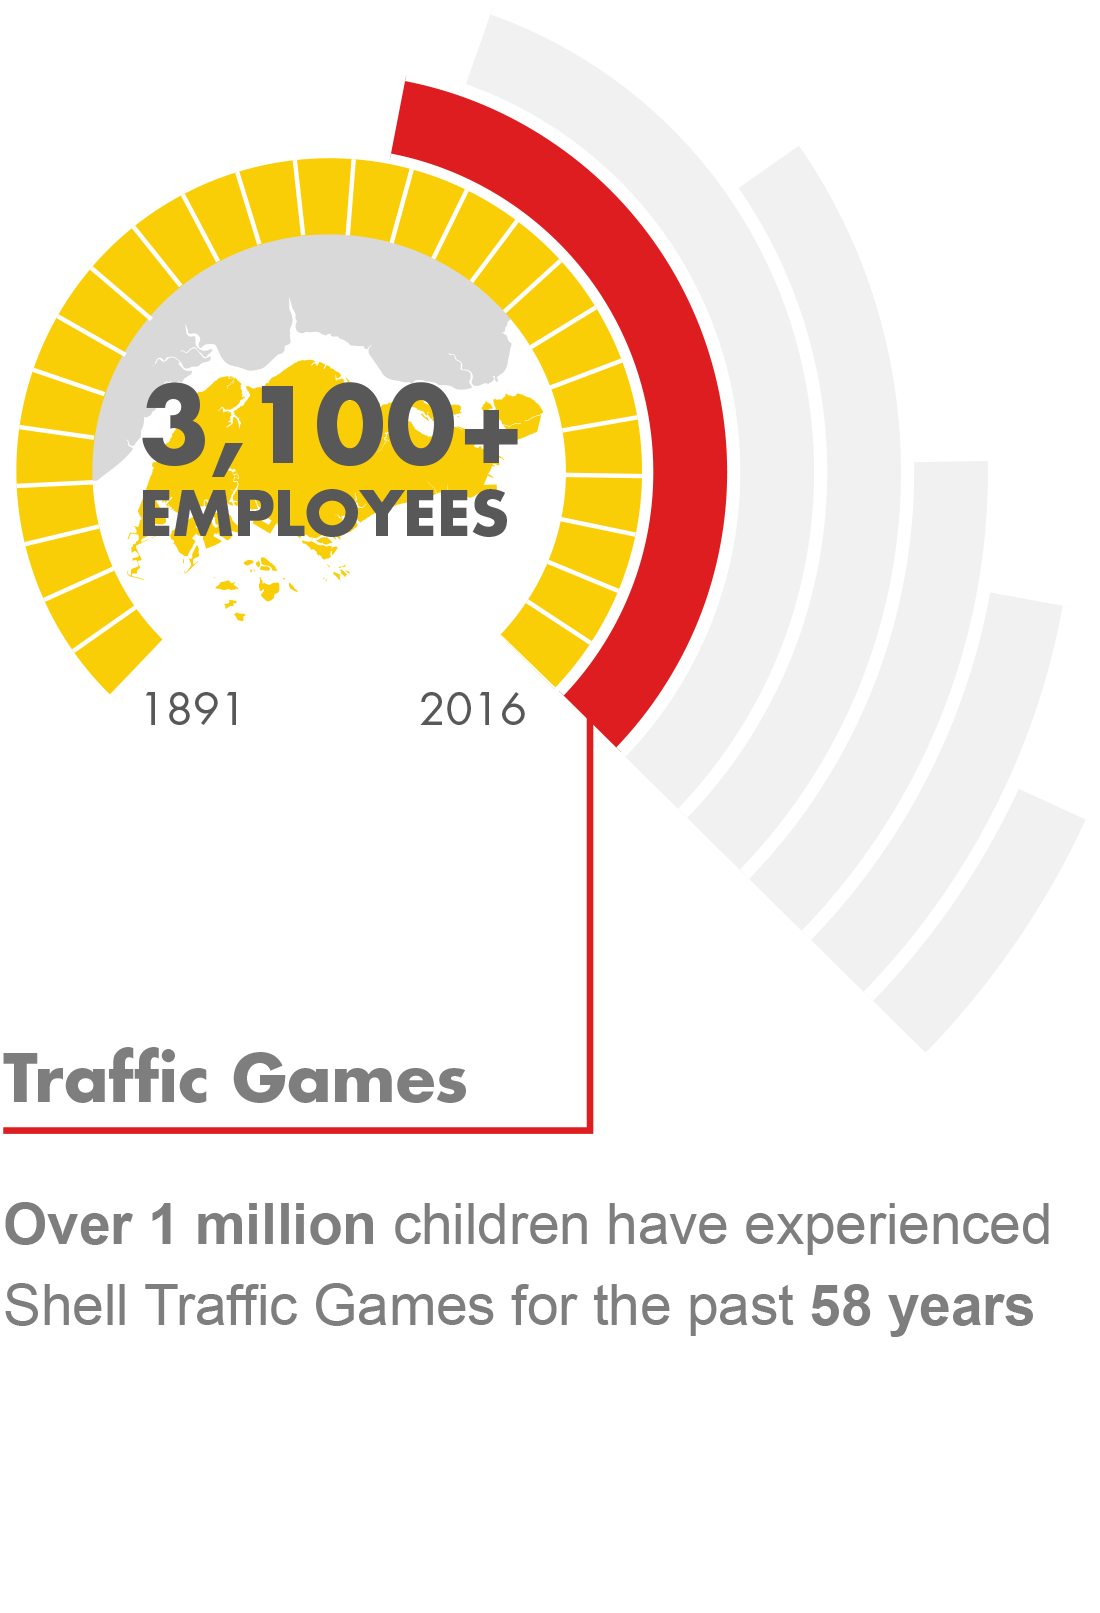 Traffic Games - Over 1 million children have experienced Shell Traffic Games for the past 58 years